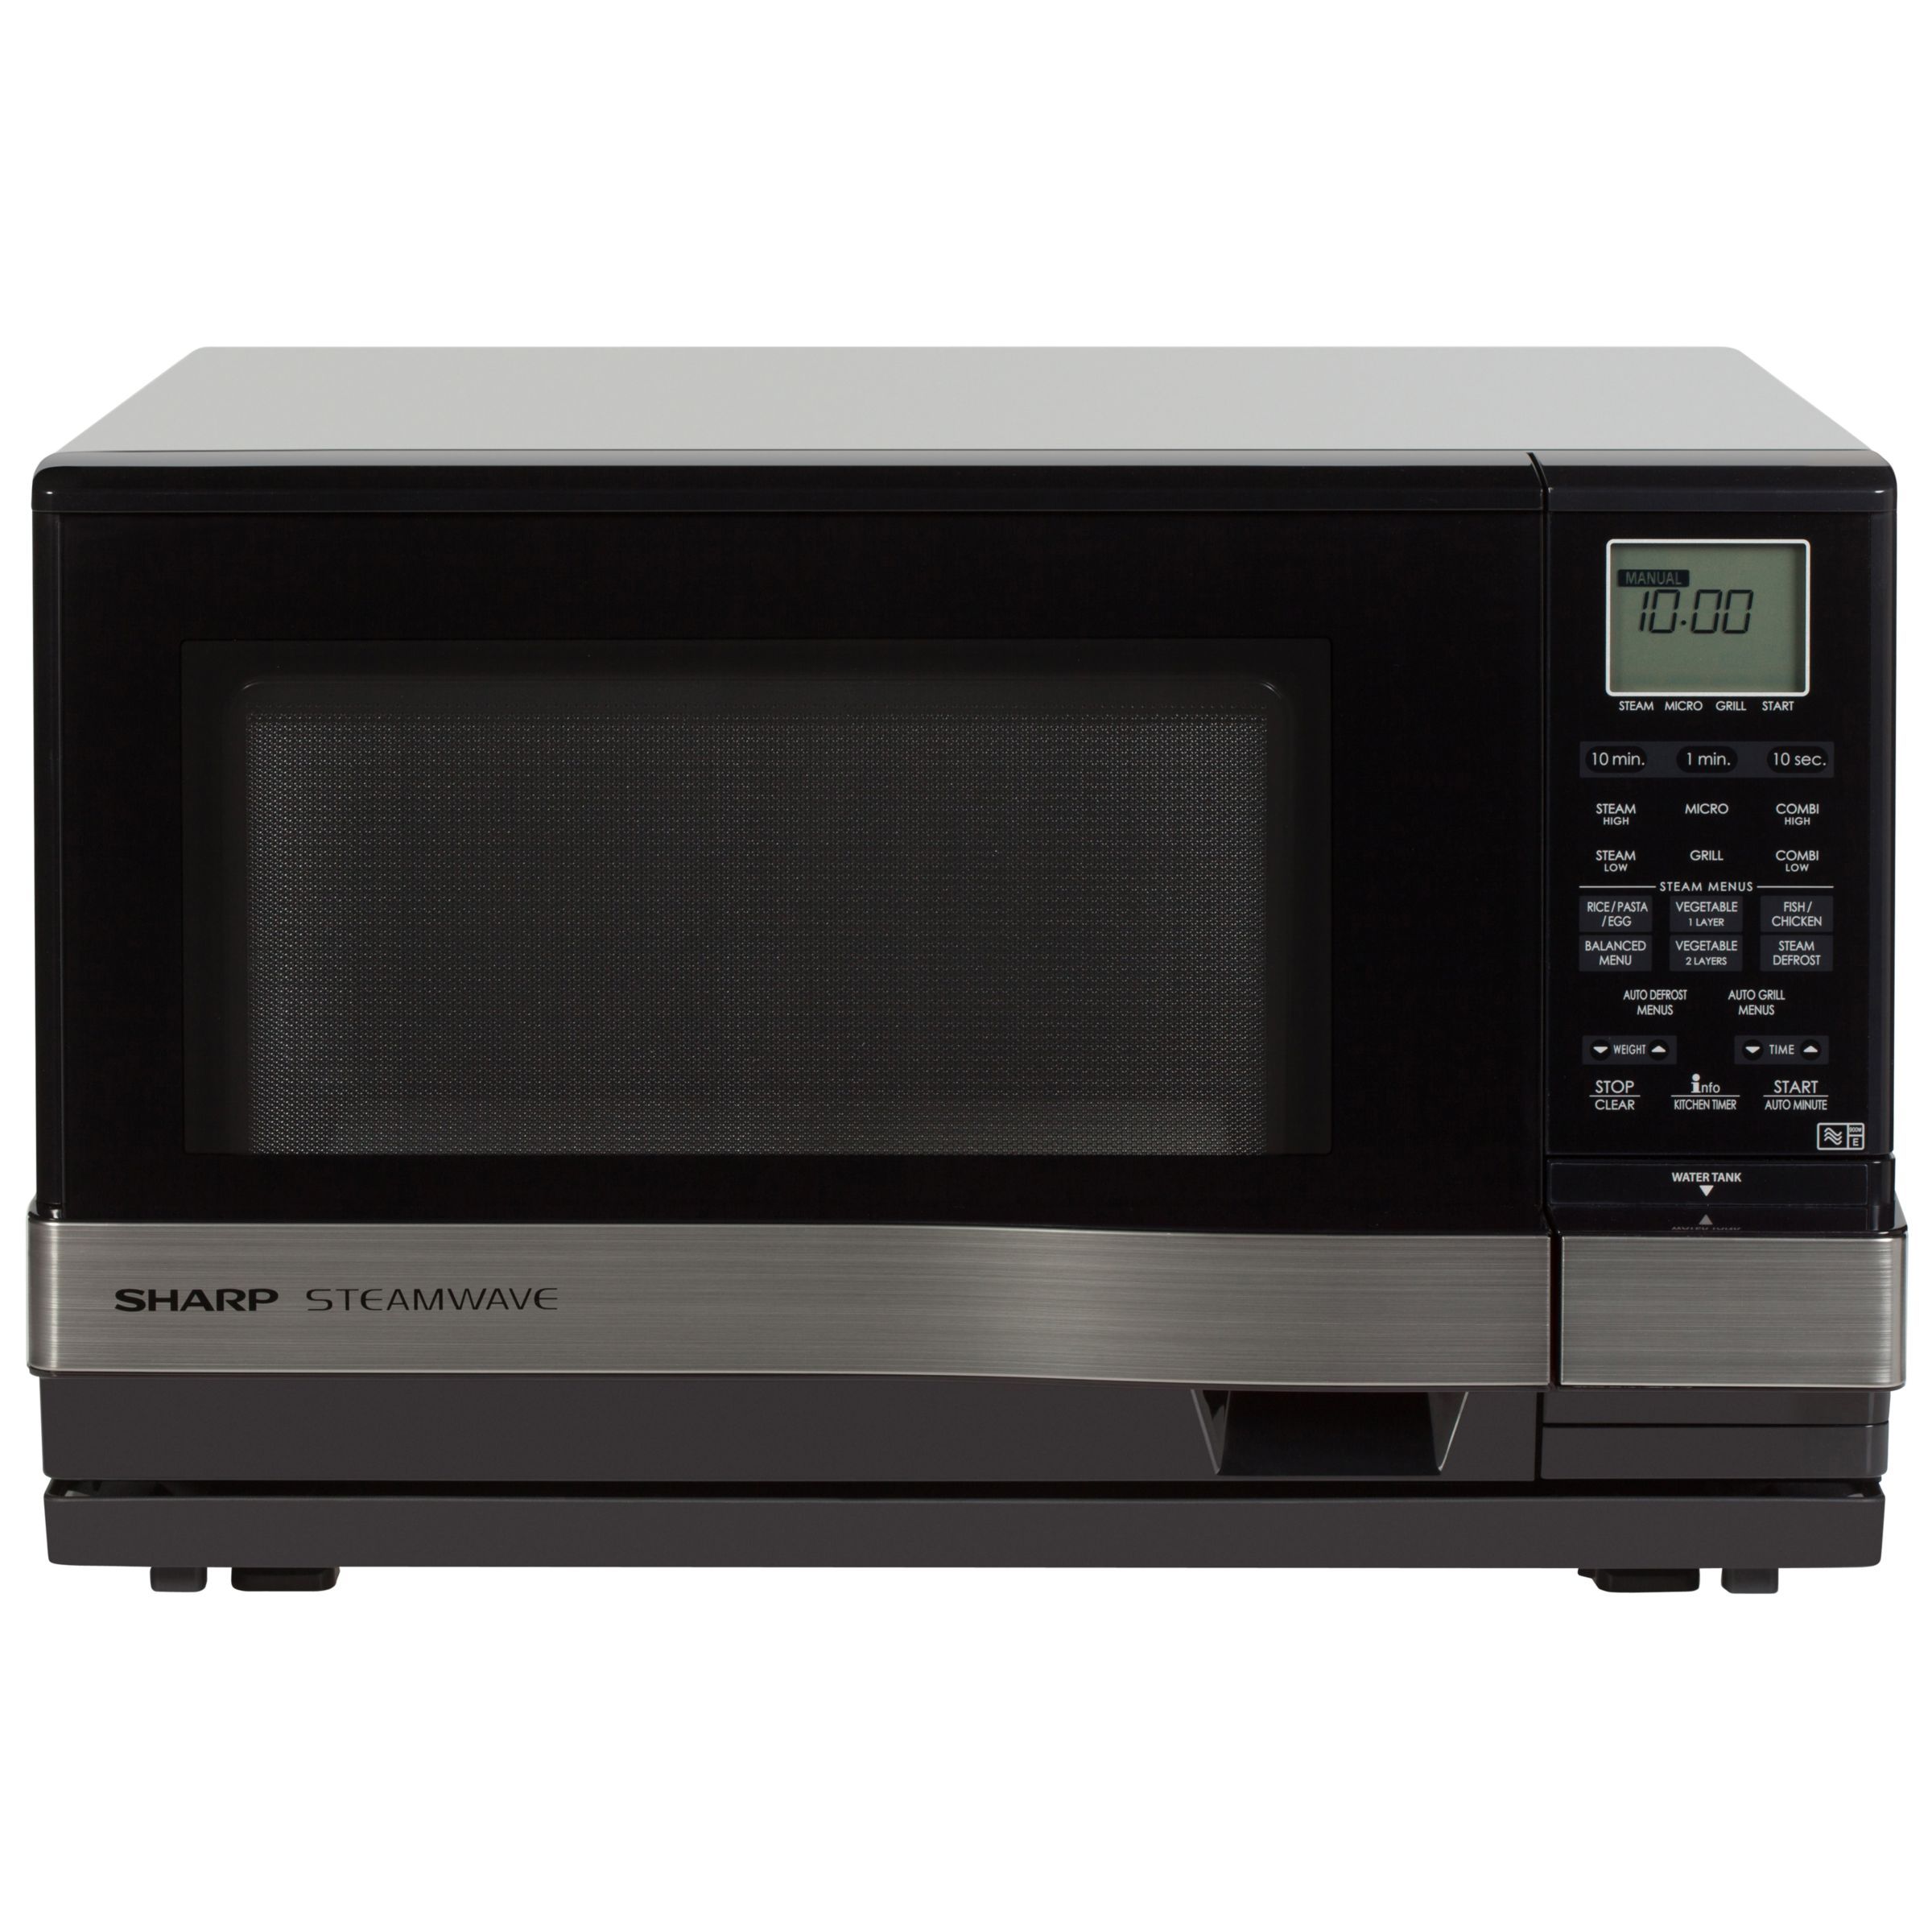 Sharp AX1100SLM Steam Oven and Microwave Grill, Silver at John Lewis